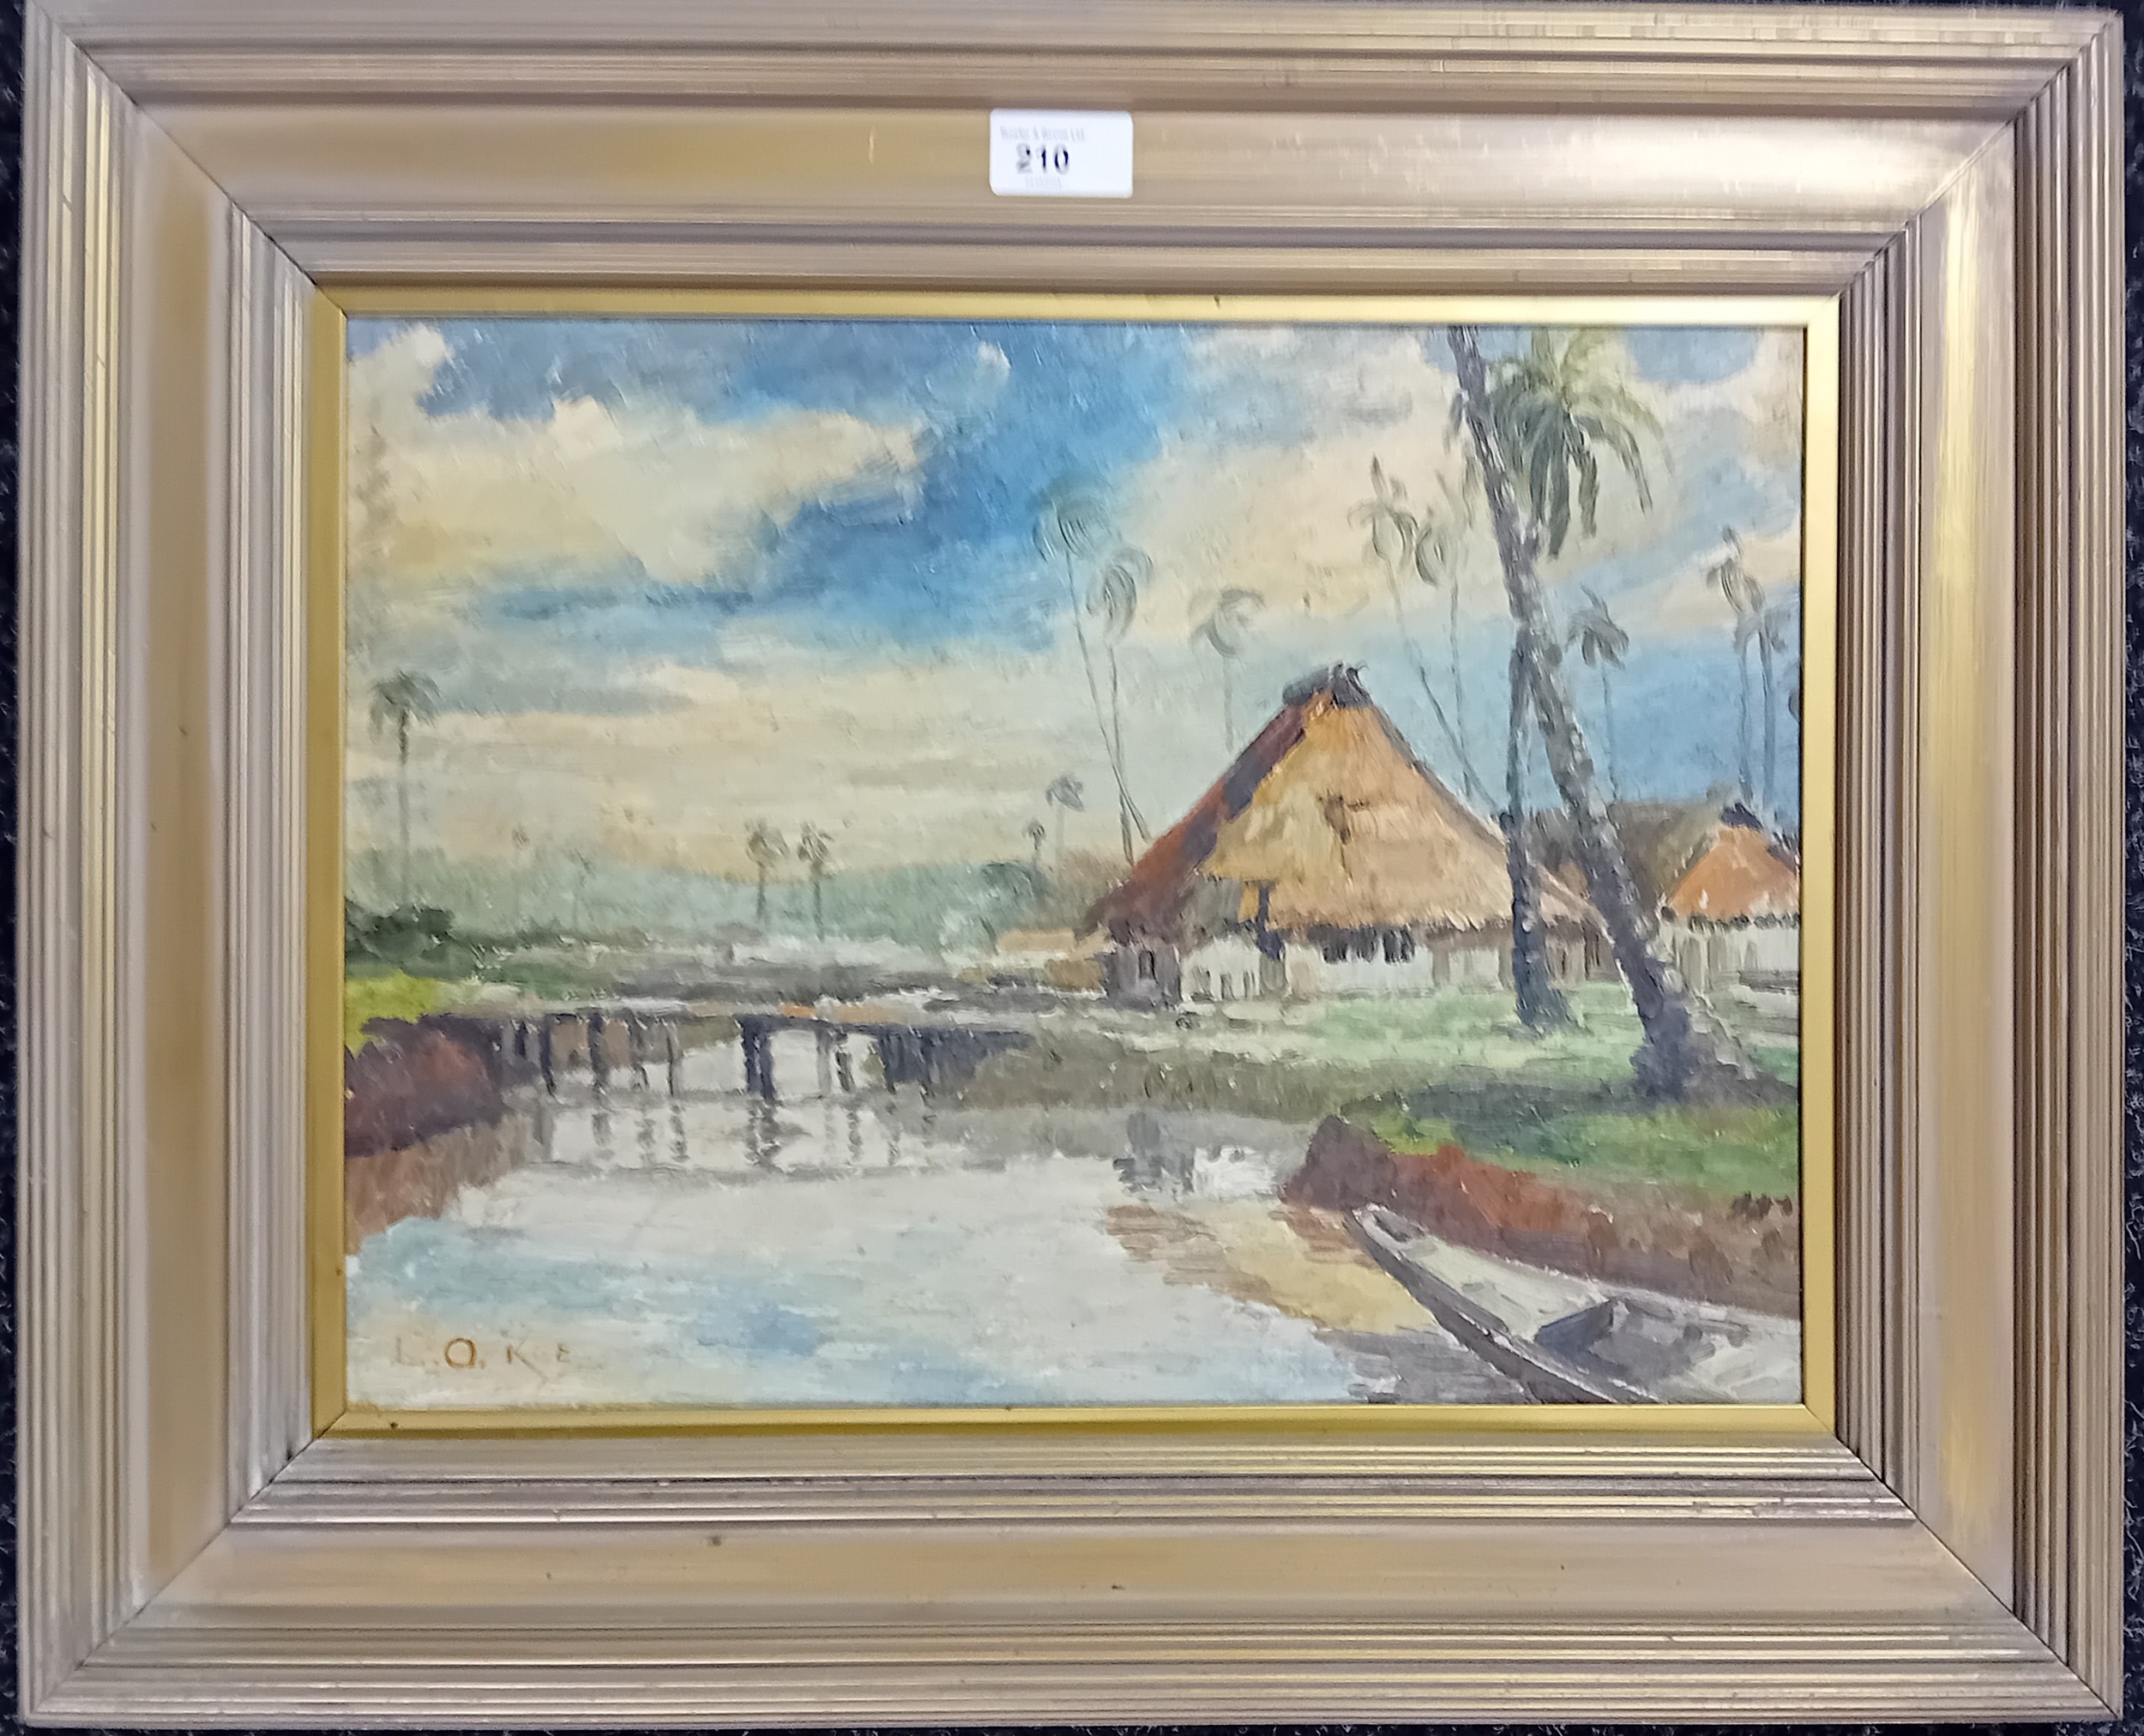 L.O.Kee Oil on board 'House by the river', signed. [Frame 47x57cm] - Image 2 of 4